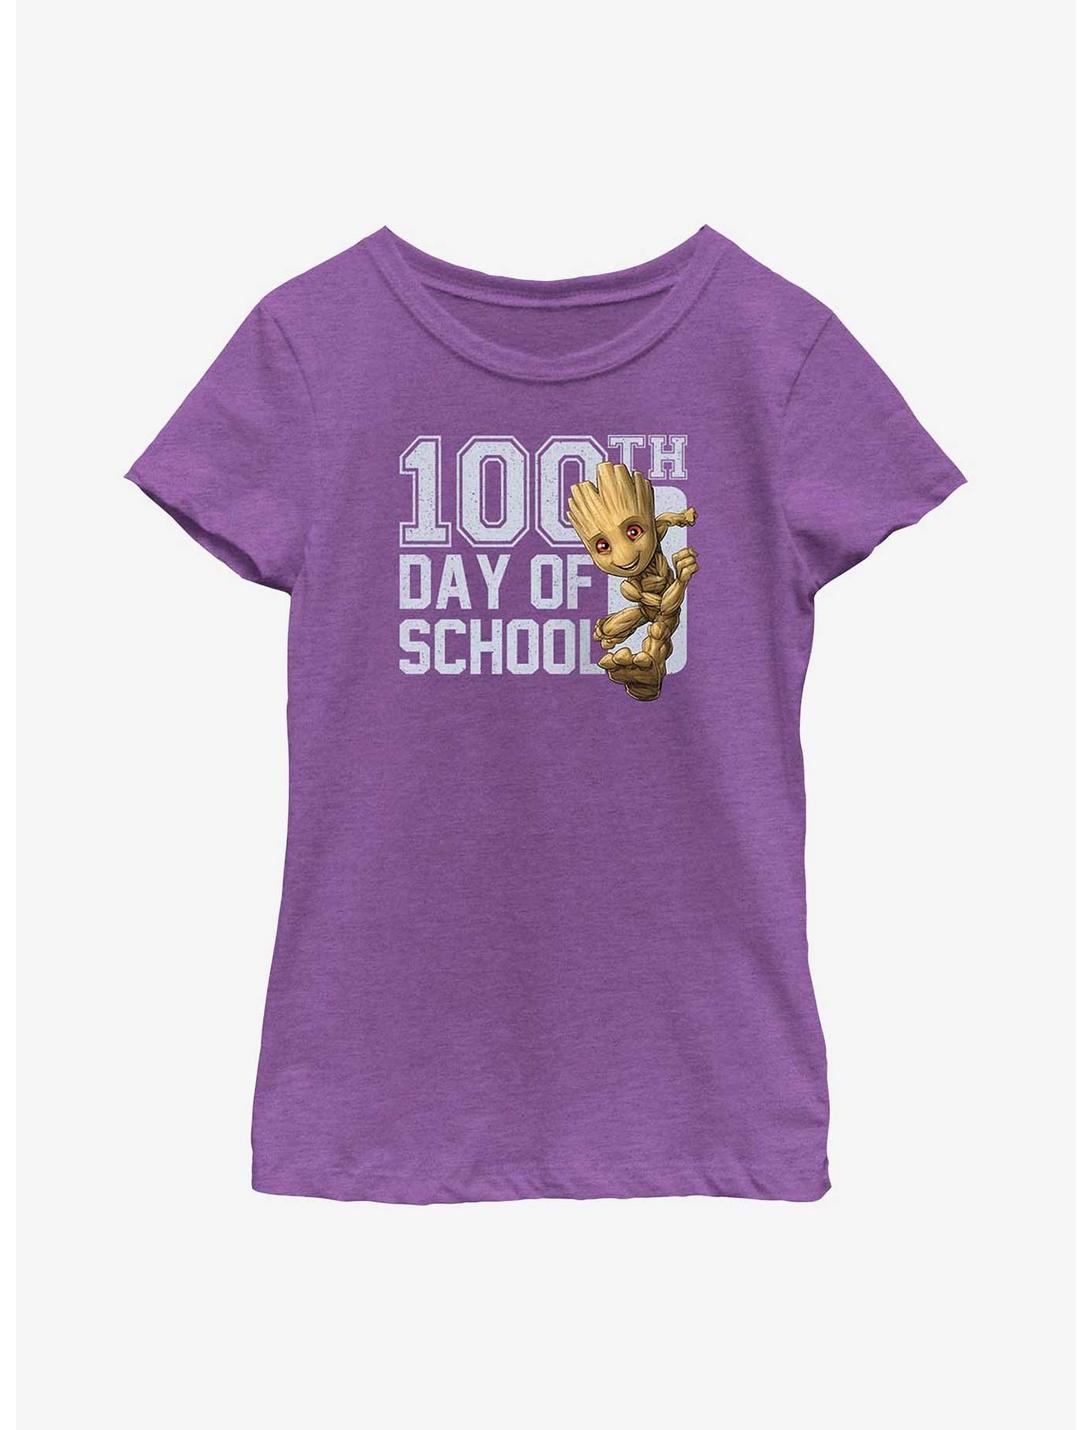 Marvel Guardians of the Galaxy Groot 100th Day of School Youth Girls T-Shirt, PURPLE BERRY, hi-res